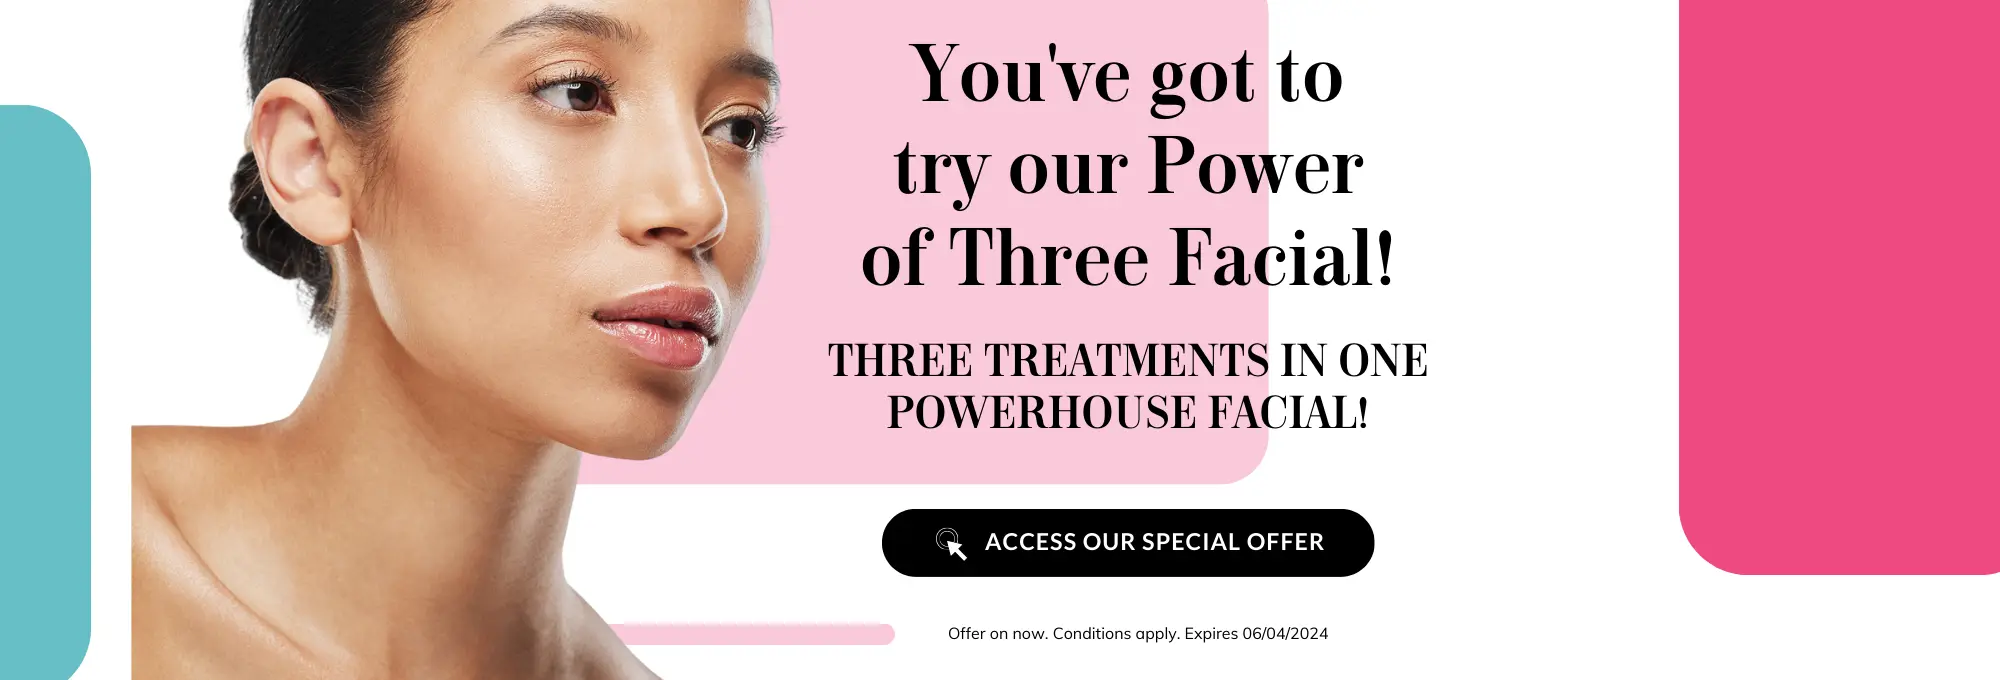 Learn more about our special offers for advanced skin treatments